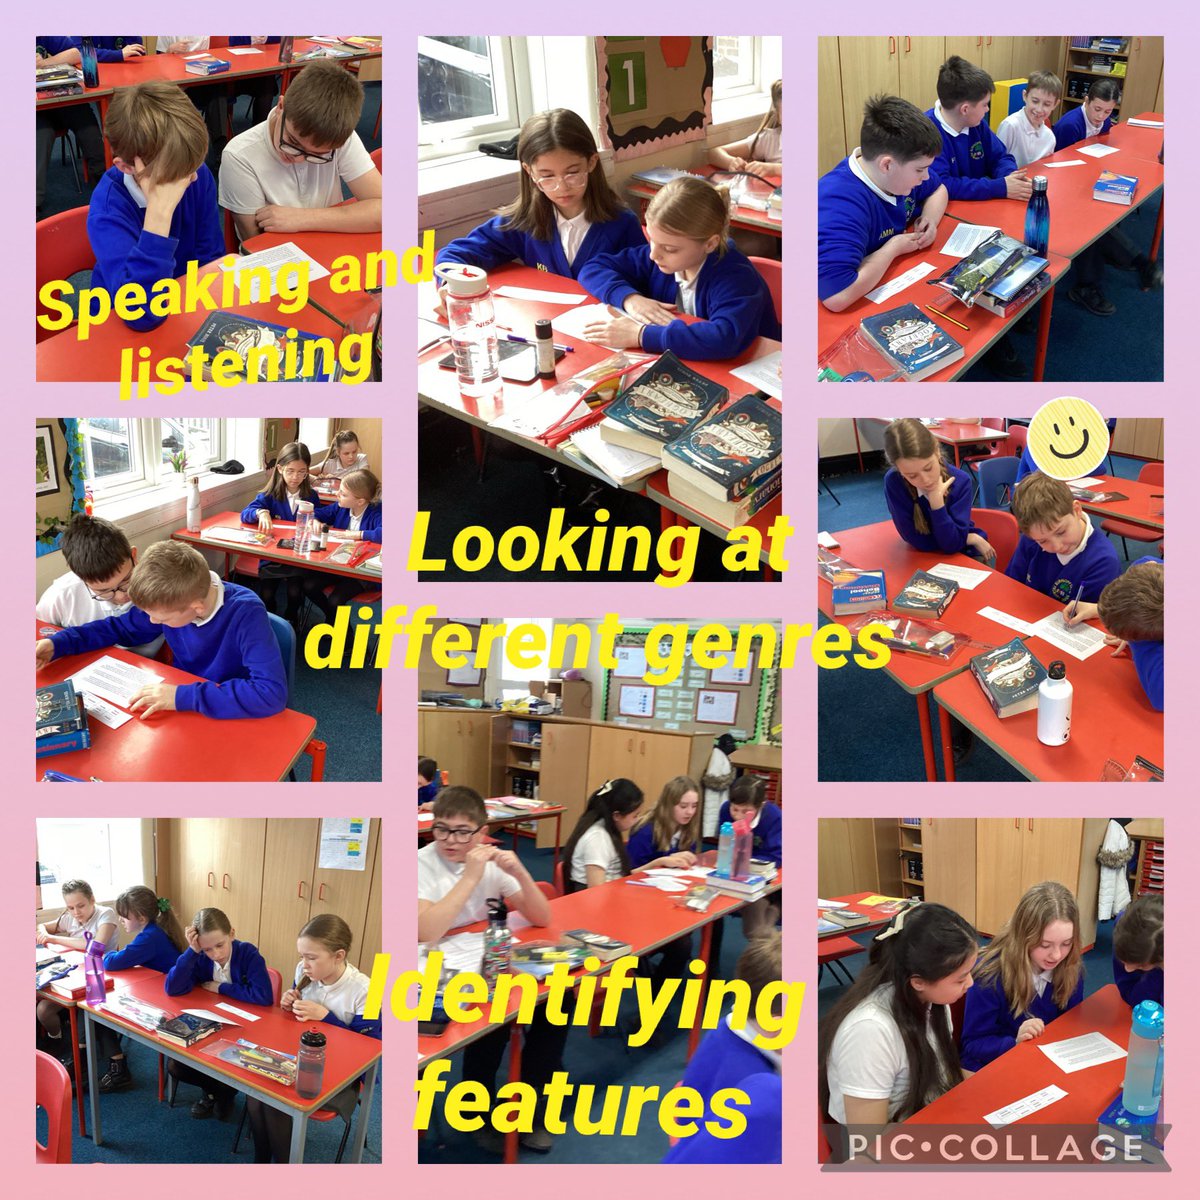 Apple Class have been looking at different genres in English so they can choose their favourite ready to write their own stories! #burnopfieldenglish #englishburnopfield